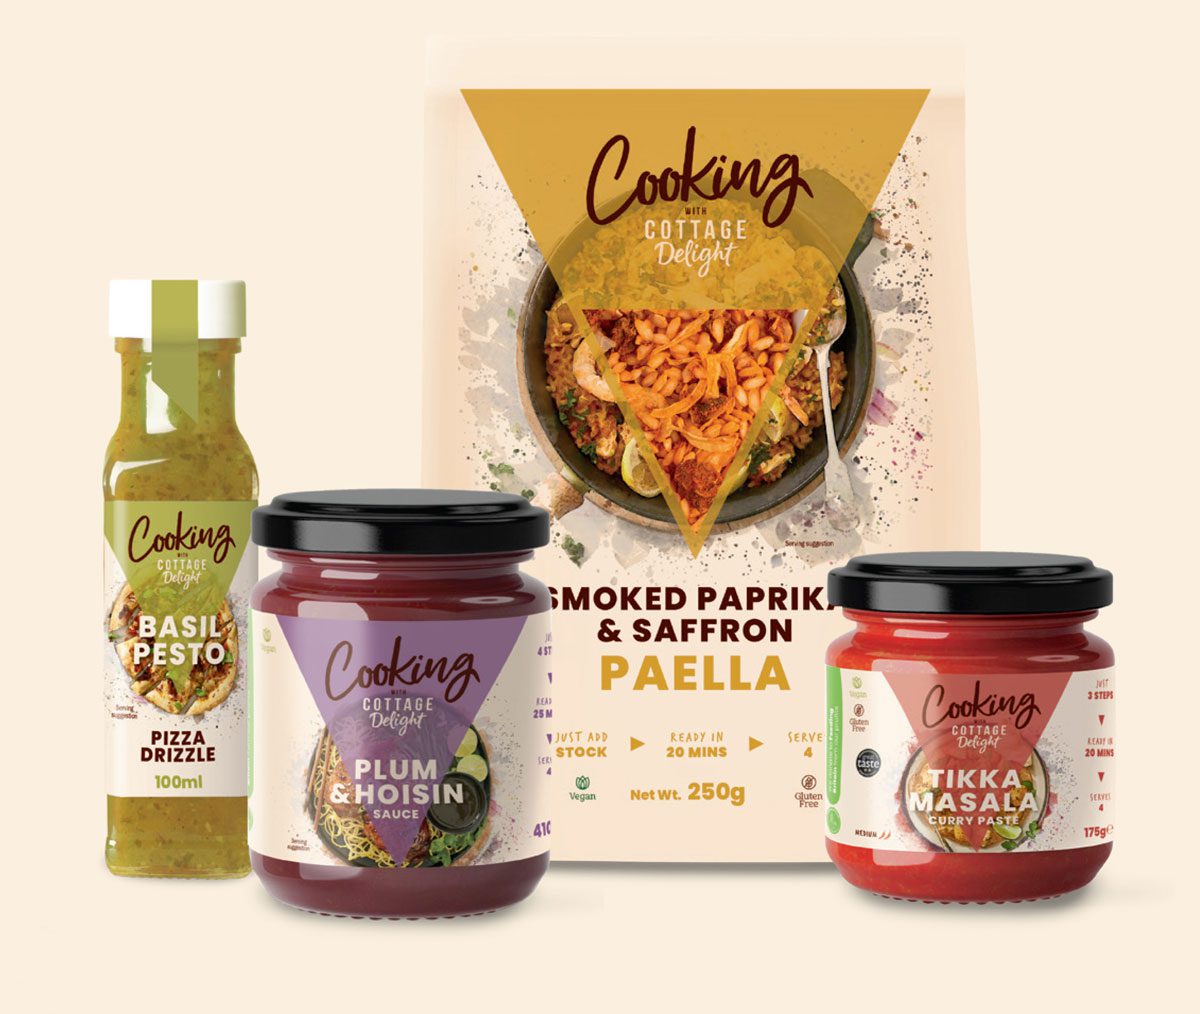 The Cooking with Cottage Delight range is aimed at the convenience channel.